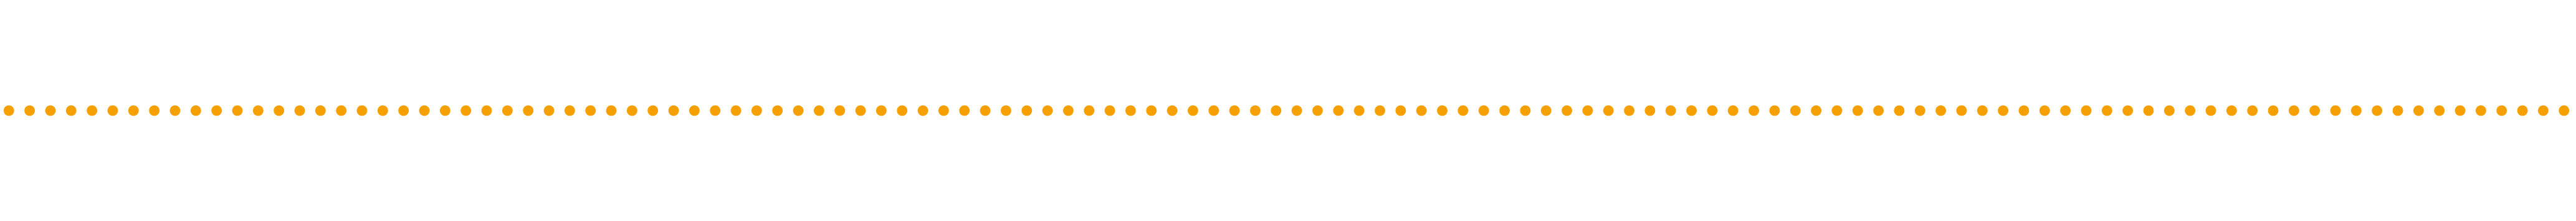 Divider line-yellow dots